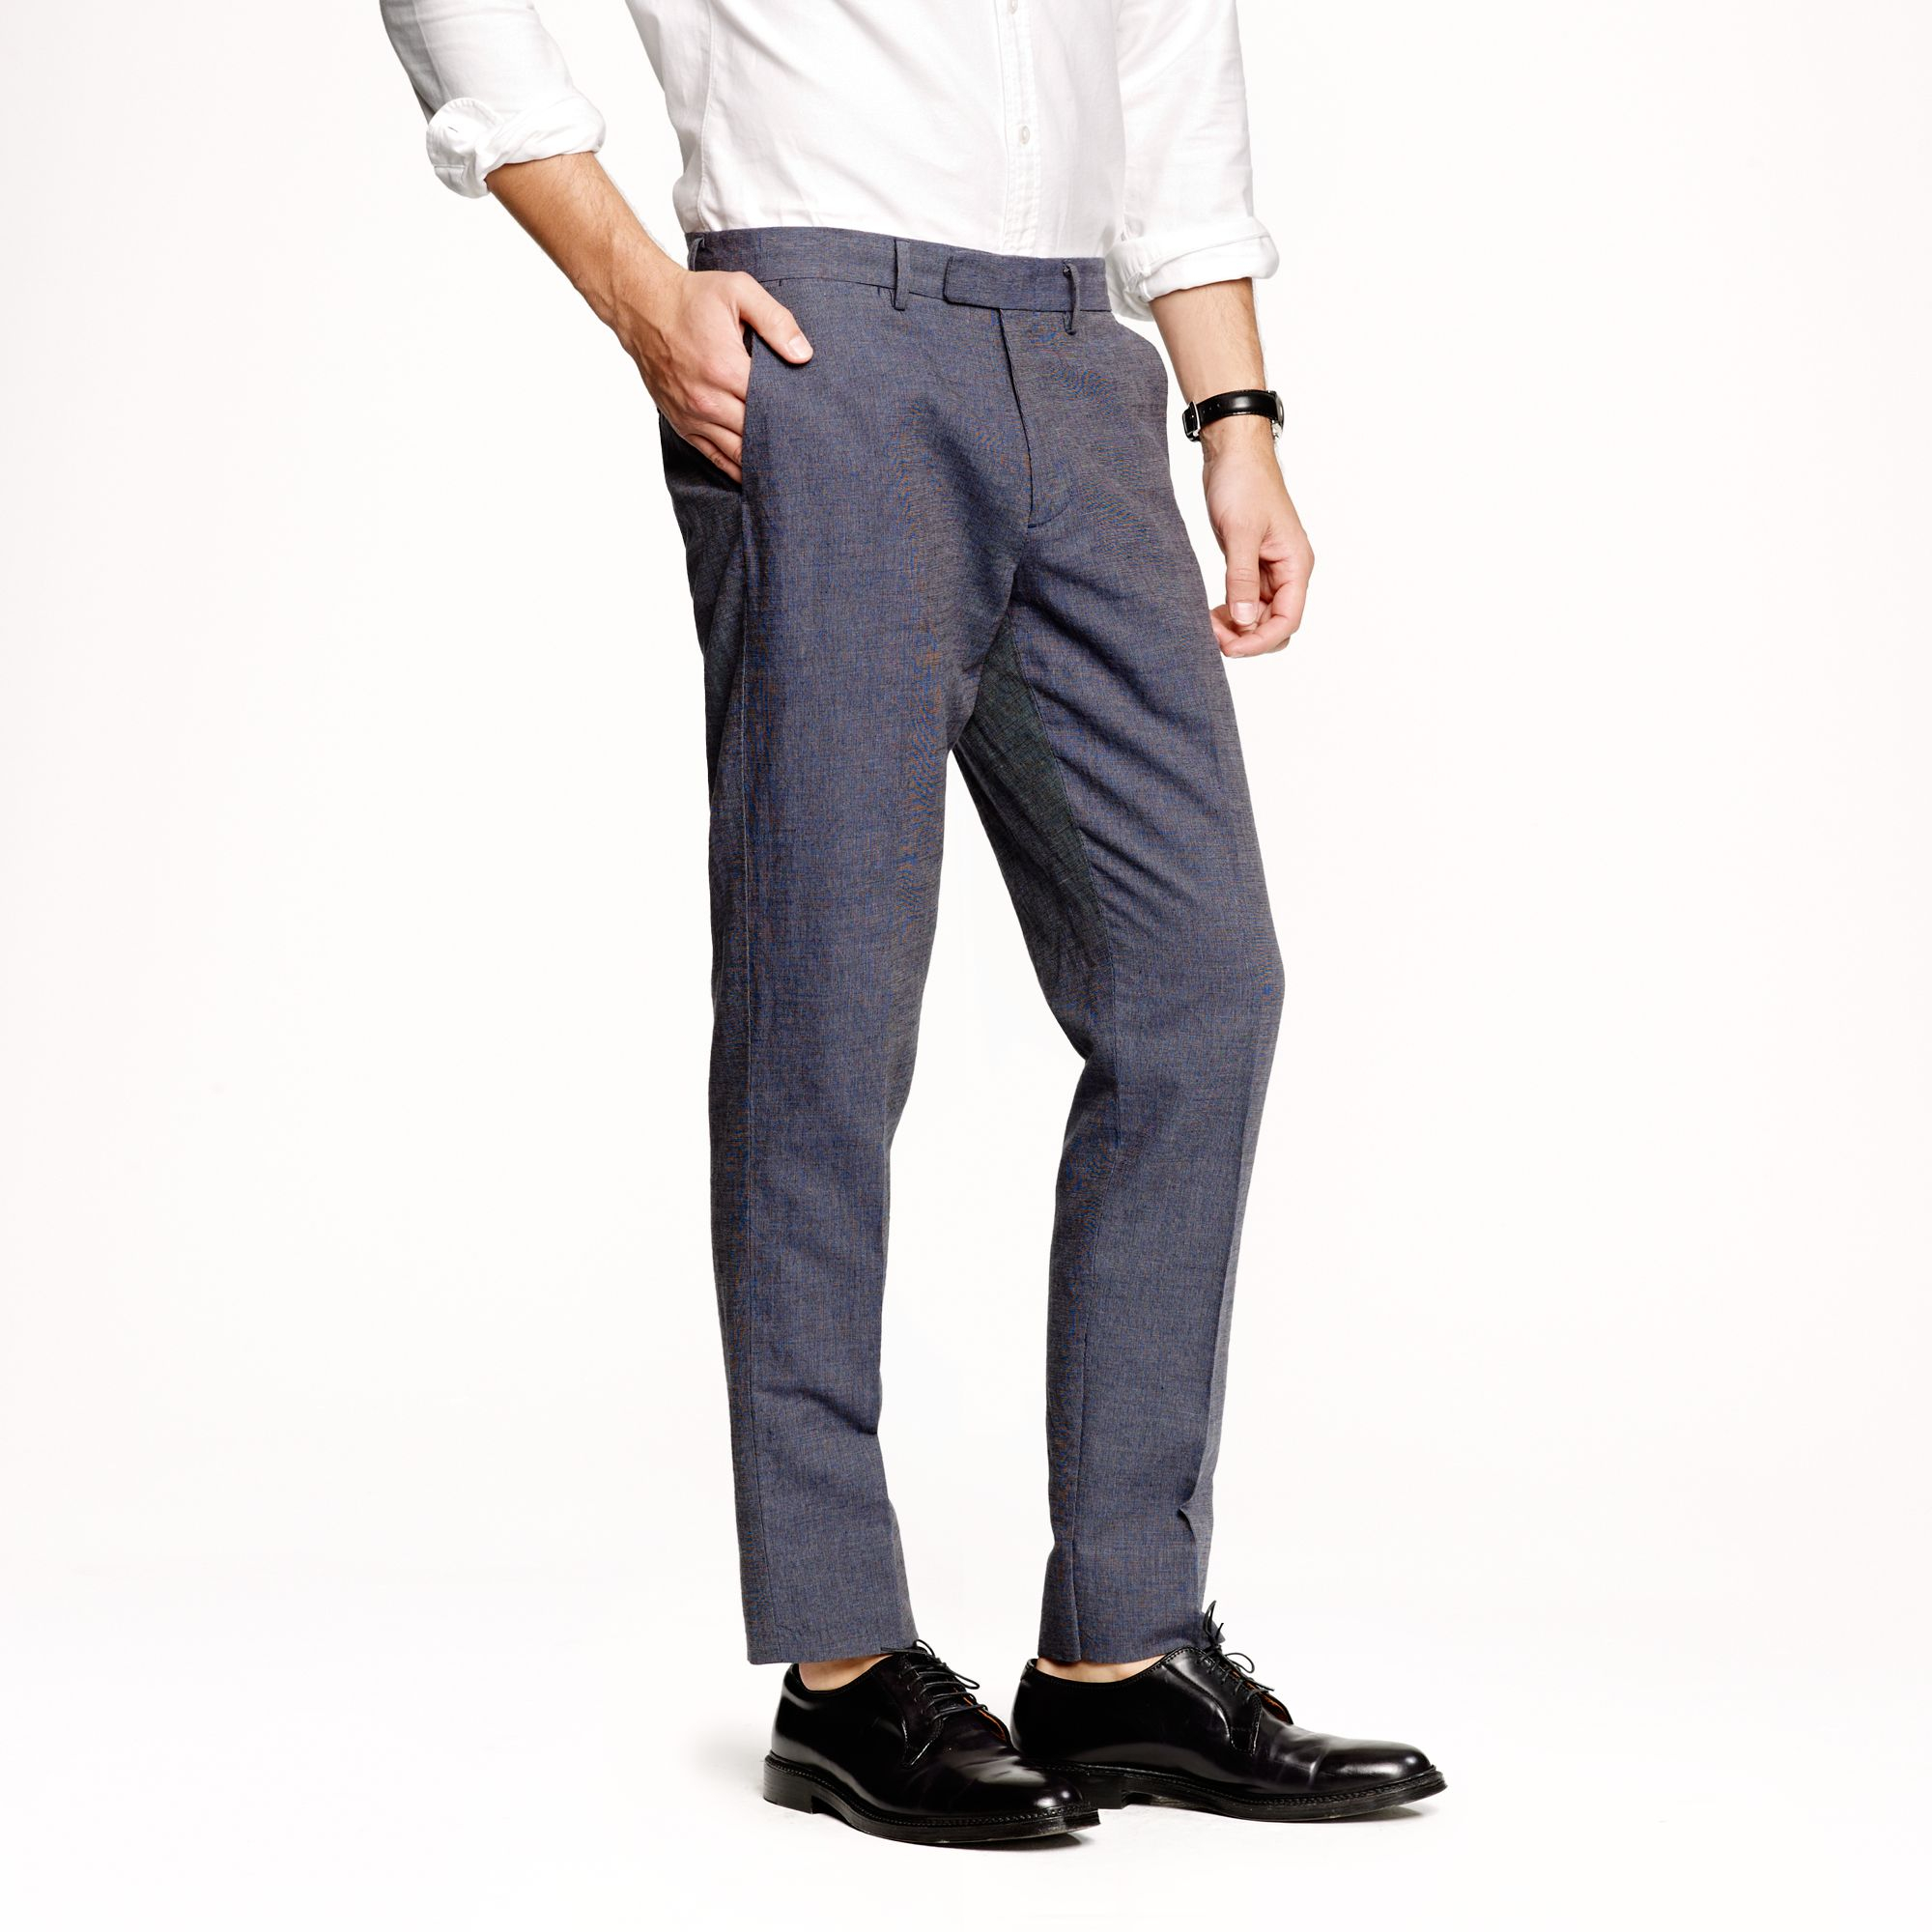 J.crew Bowery Slim Pant In Crosshatch Cotton-Linen in Blue for Men